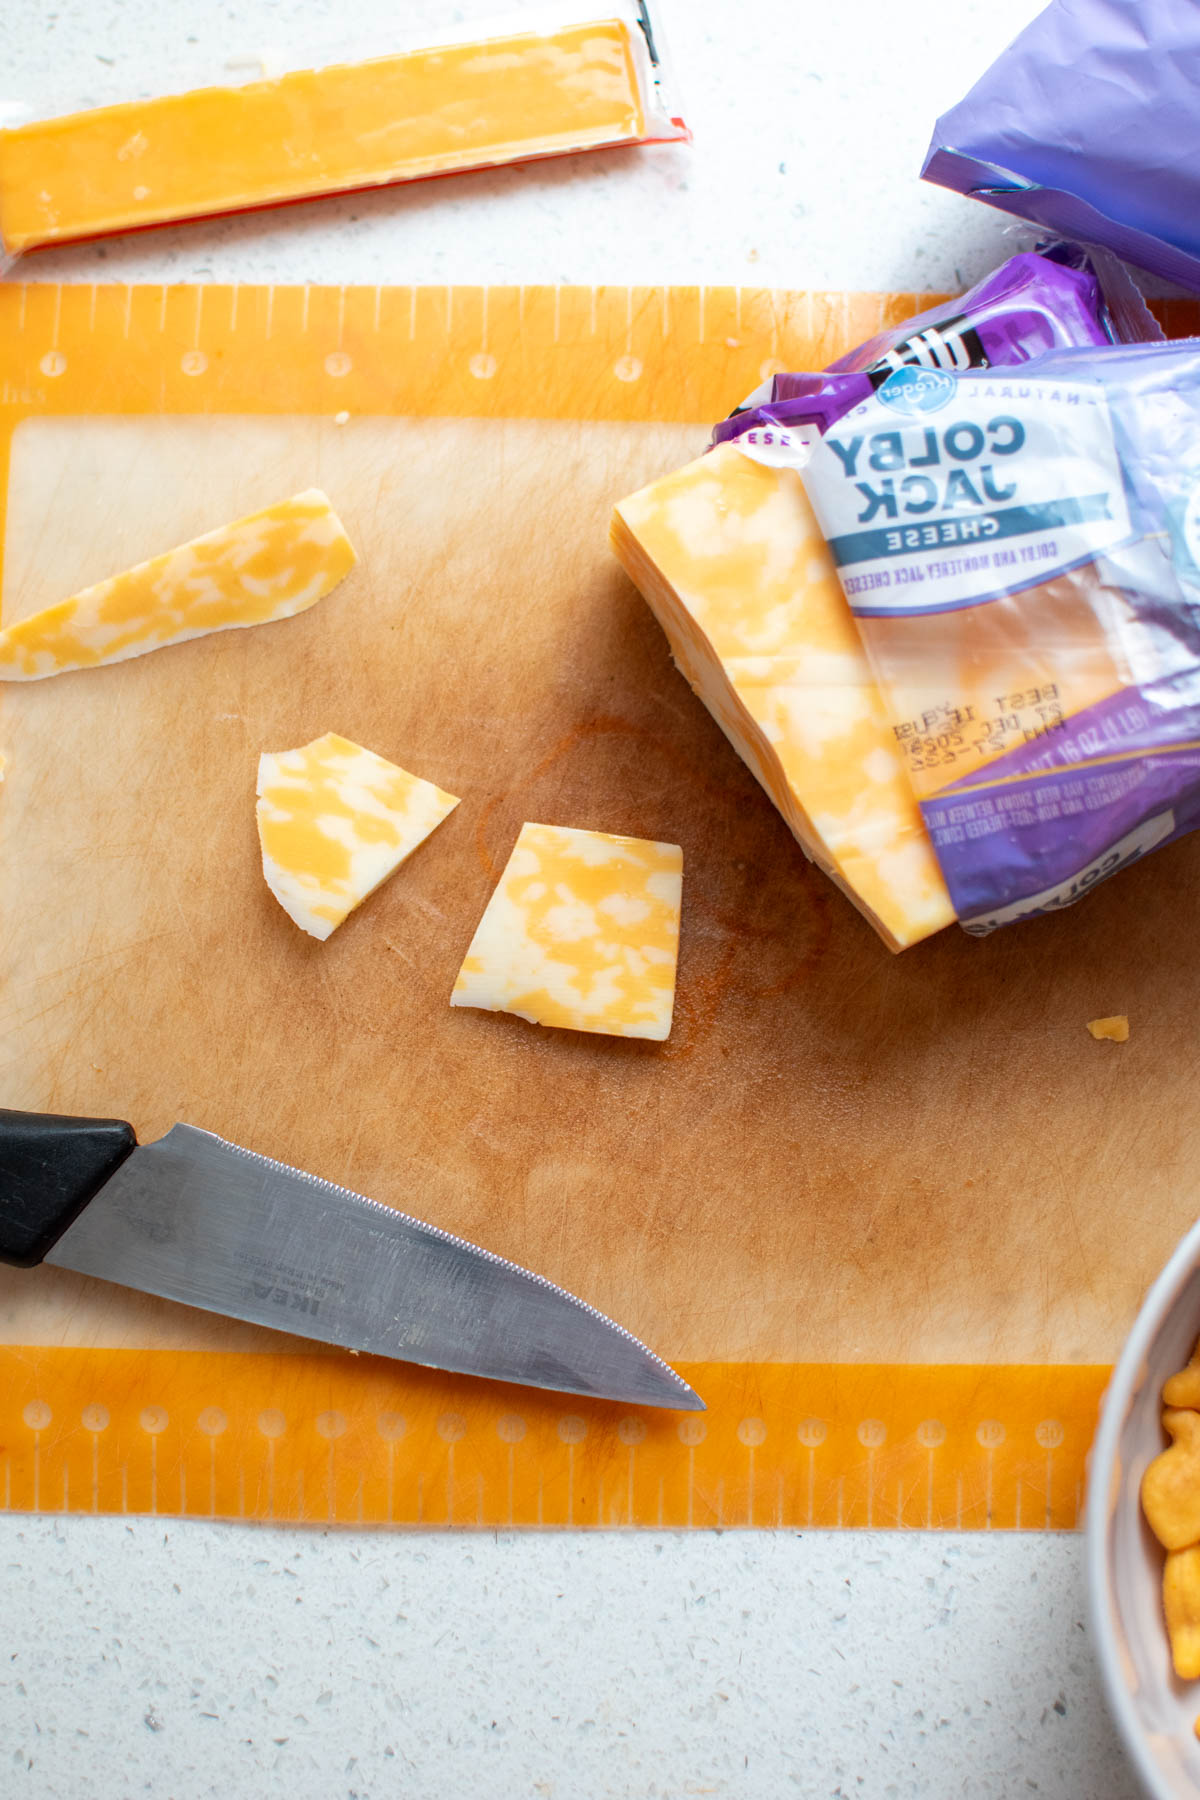 Slices of Colby Jack cheese on cutting board with knife nearby.